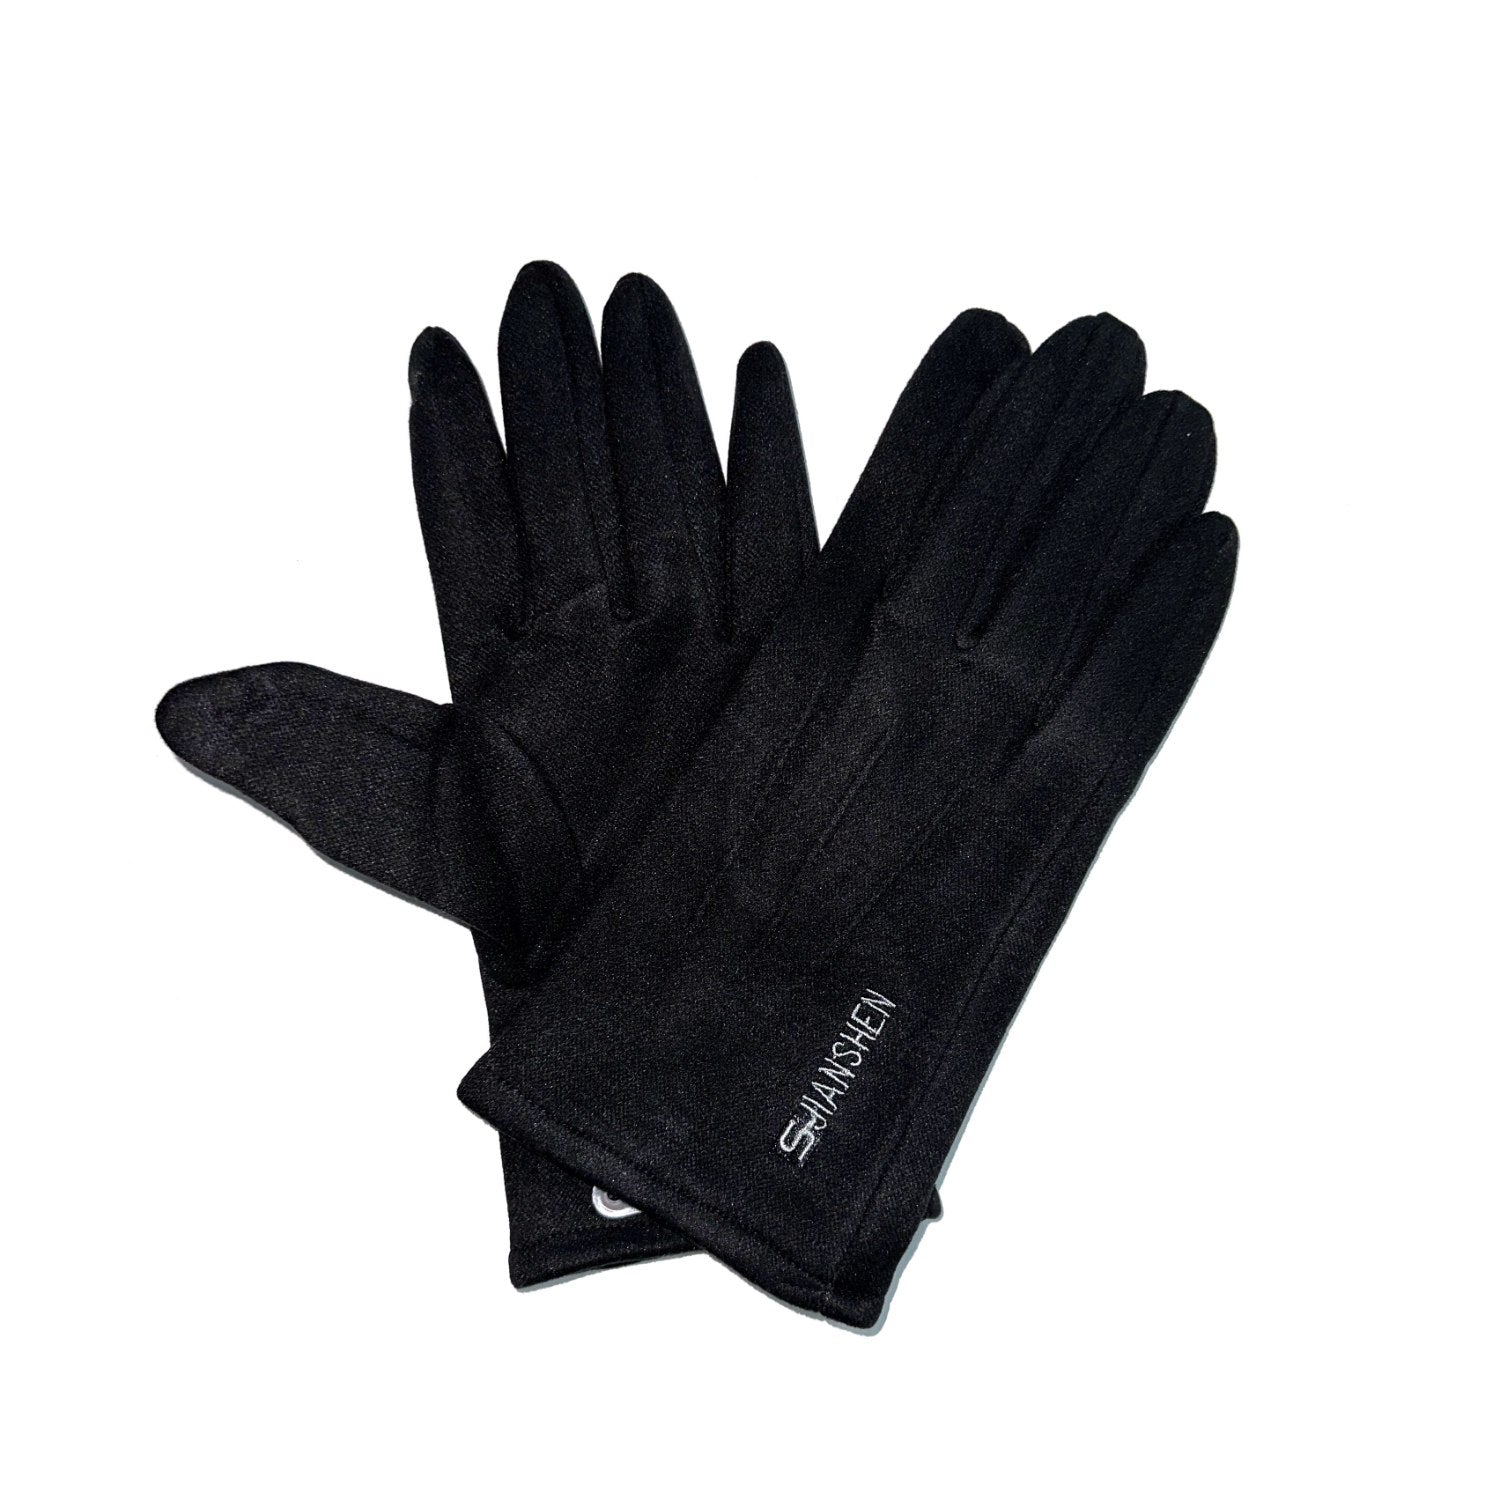 Buy K2 Insulation Layering Gloves Black at Gokyo Outdoor Clothing & Gear